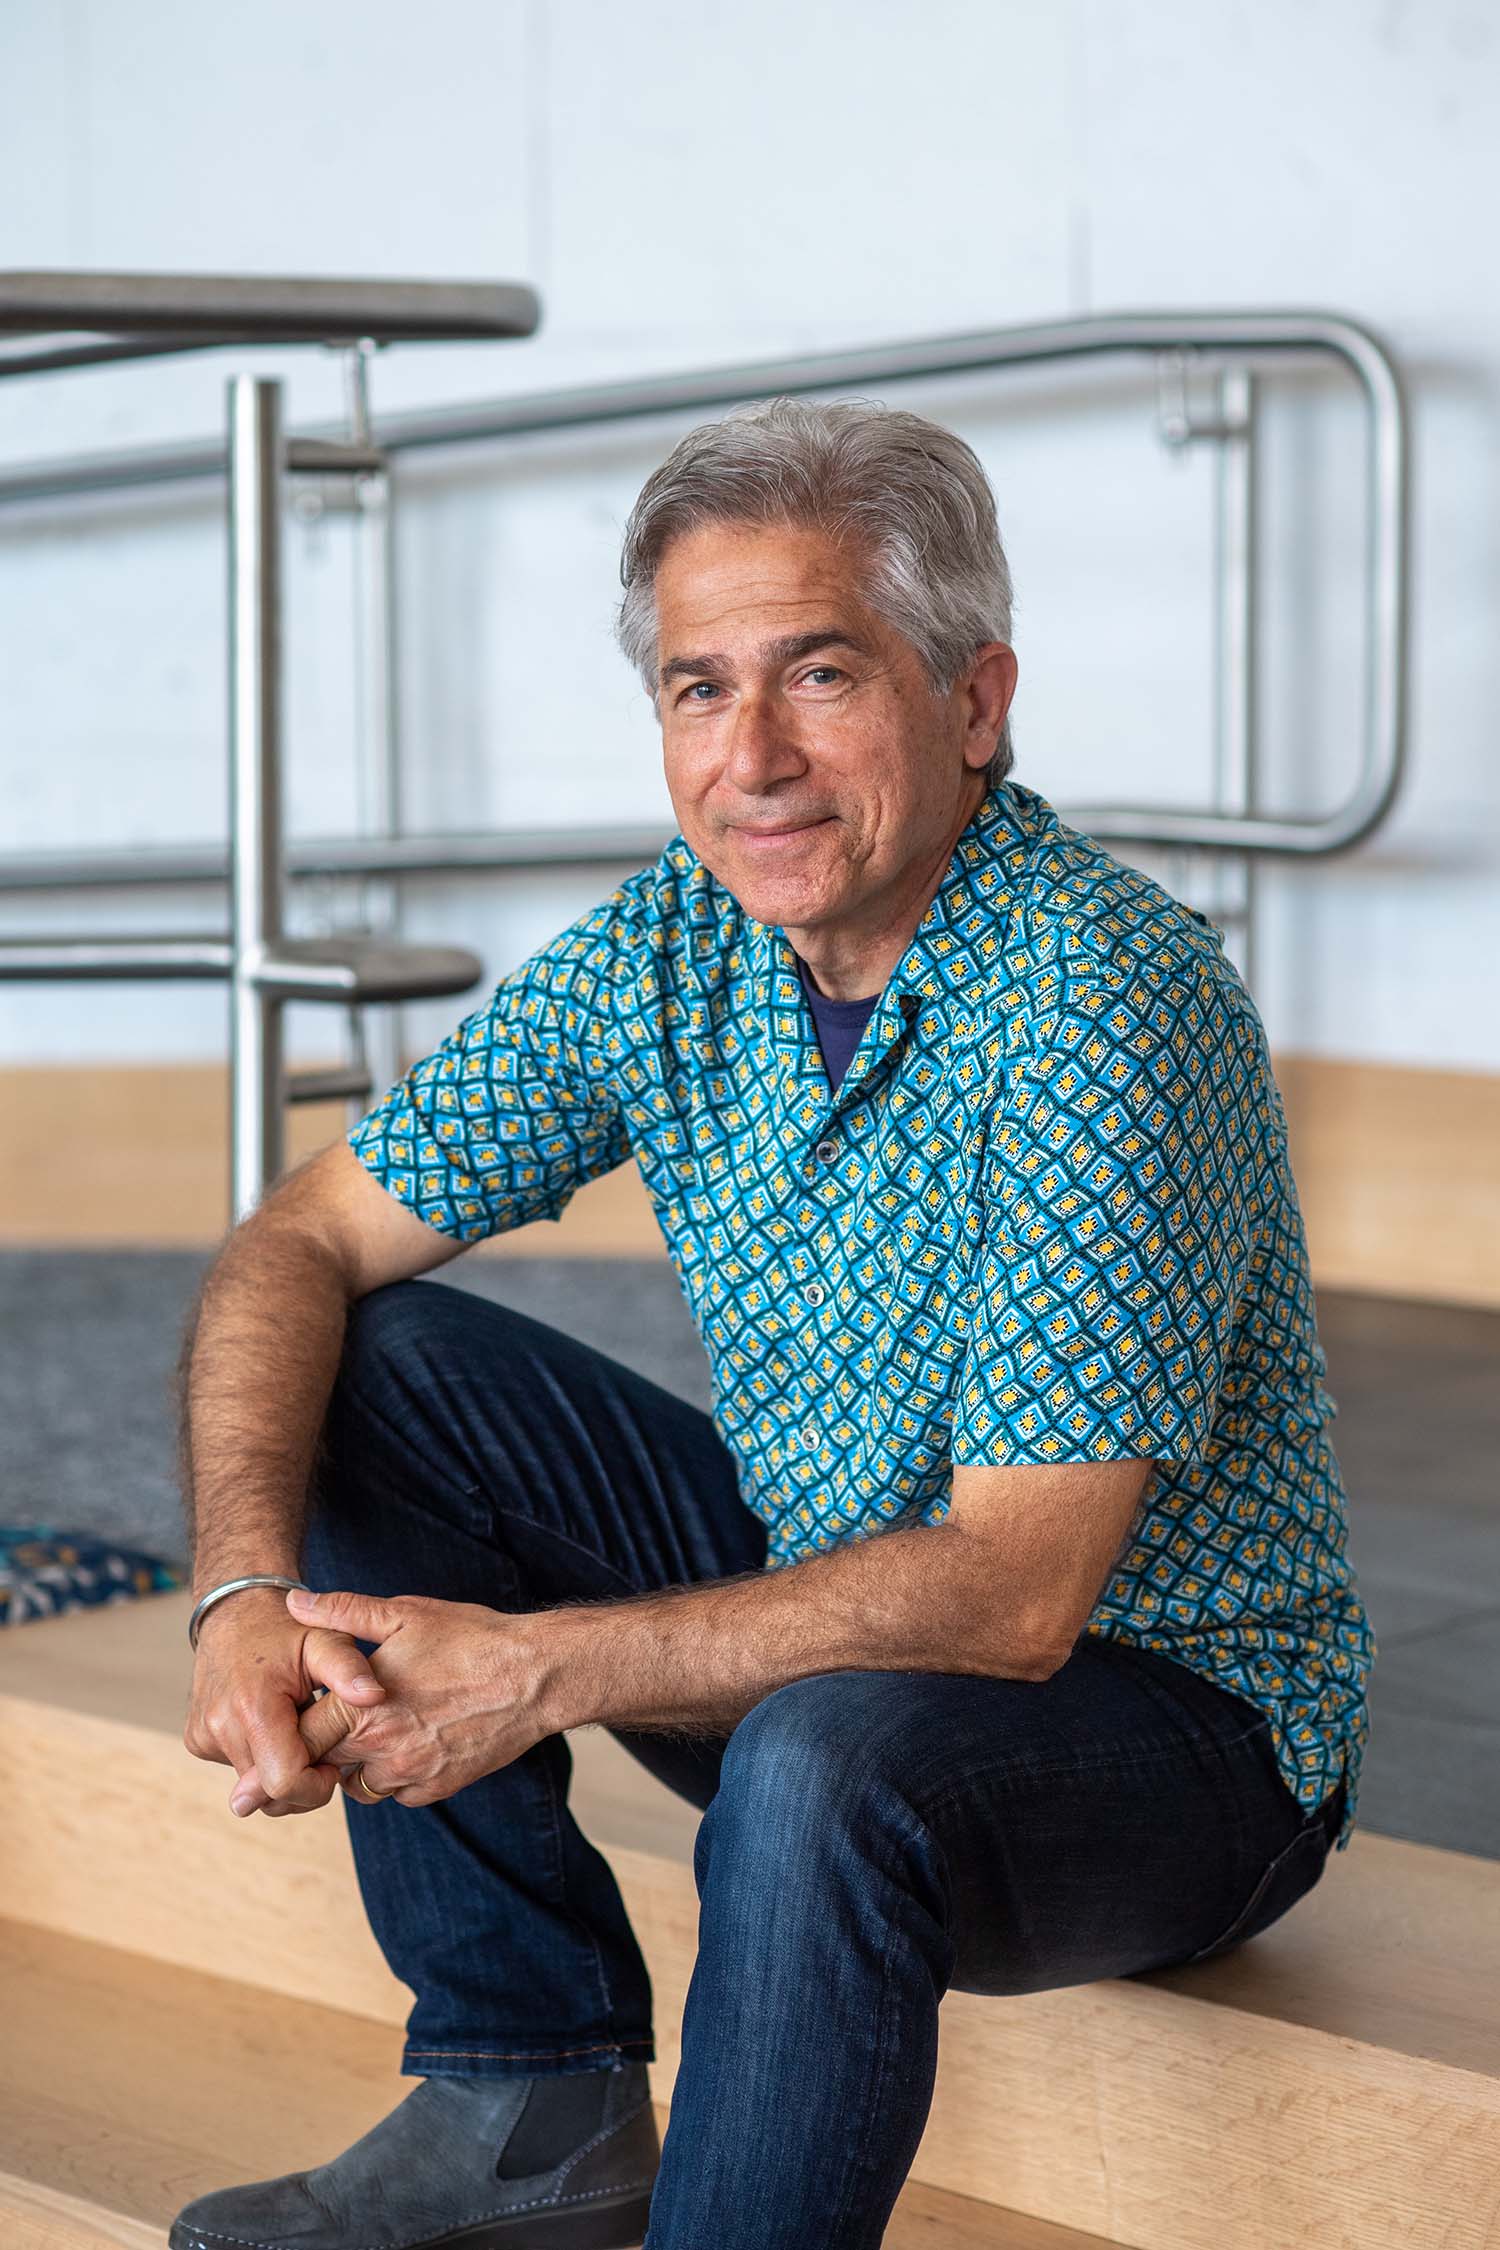 Photo of Armenian-Iranian Albrik Avanessian (MET’22). He is in his 60s, has short gray hair, and has a sincere smile. He wears a blue and white patterned shirt and dark jeans, and sits on a wooden step, resting his arms on his knees.